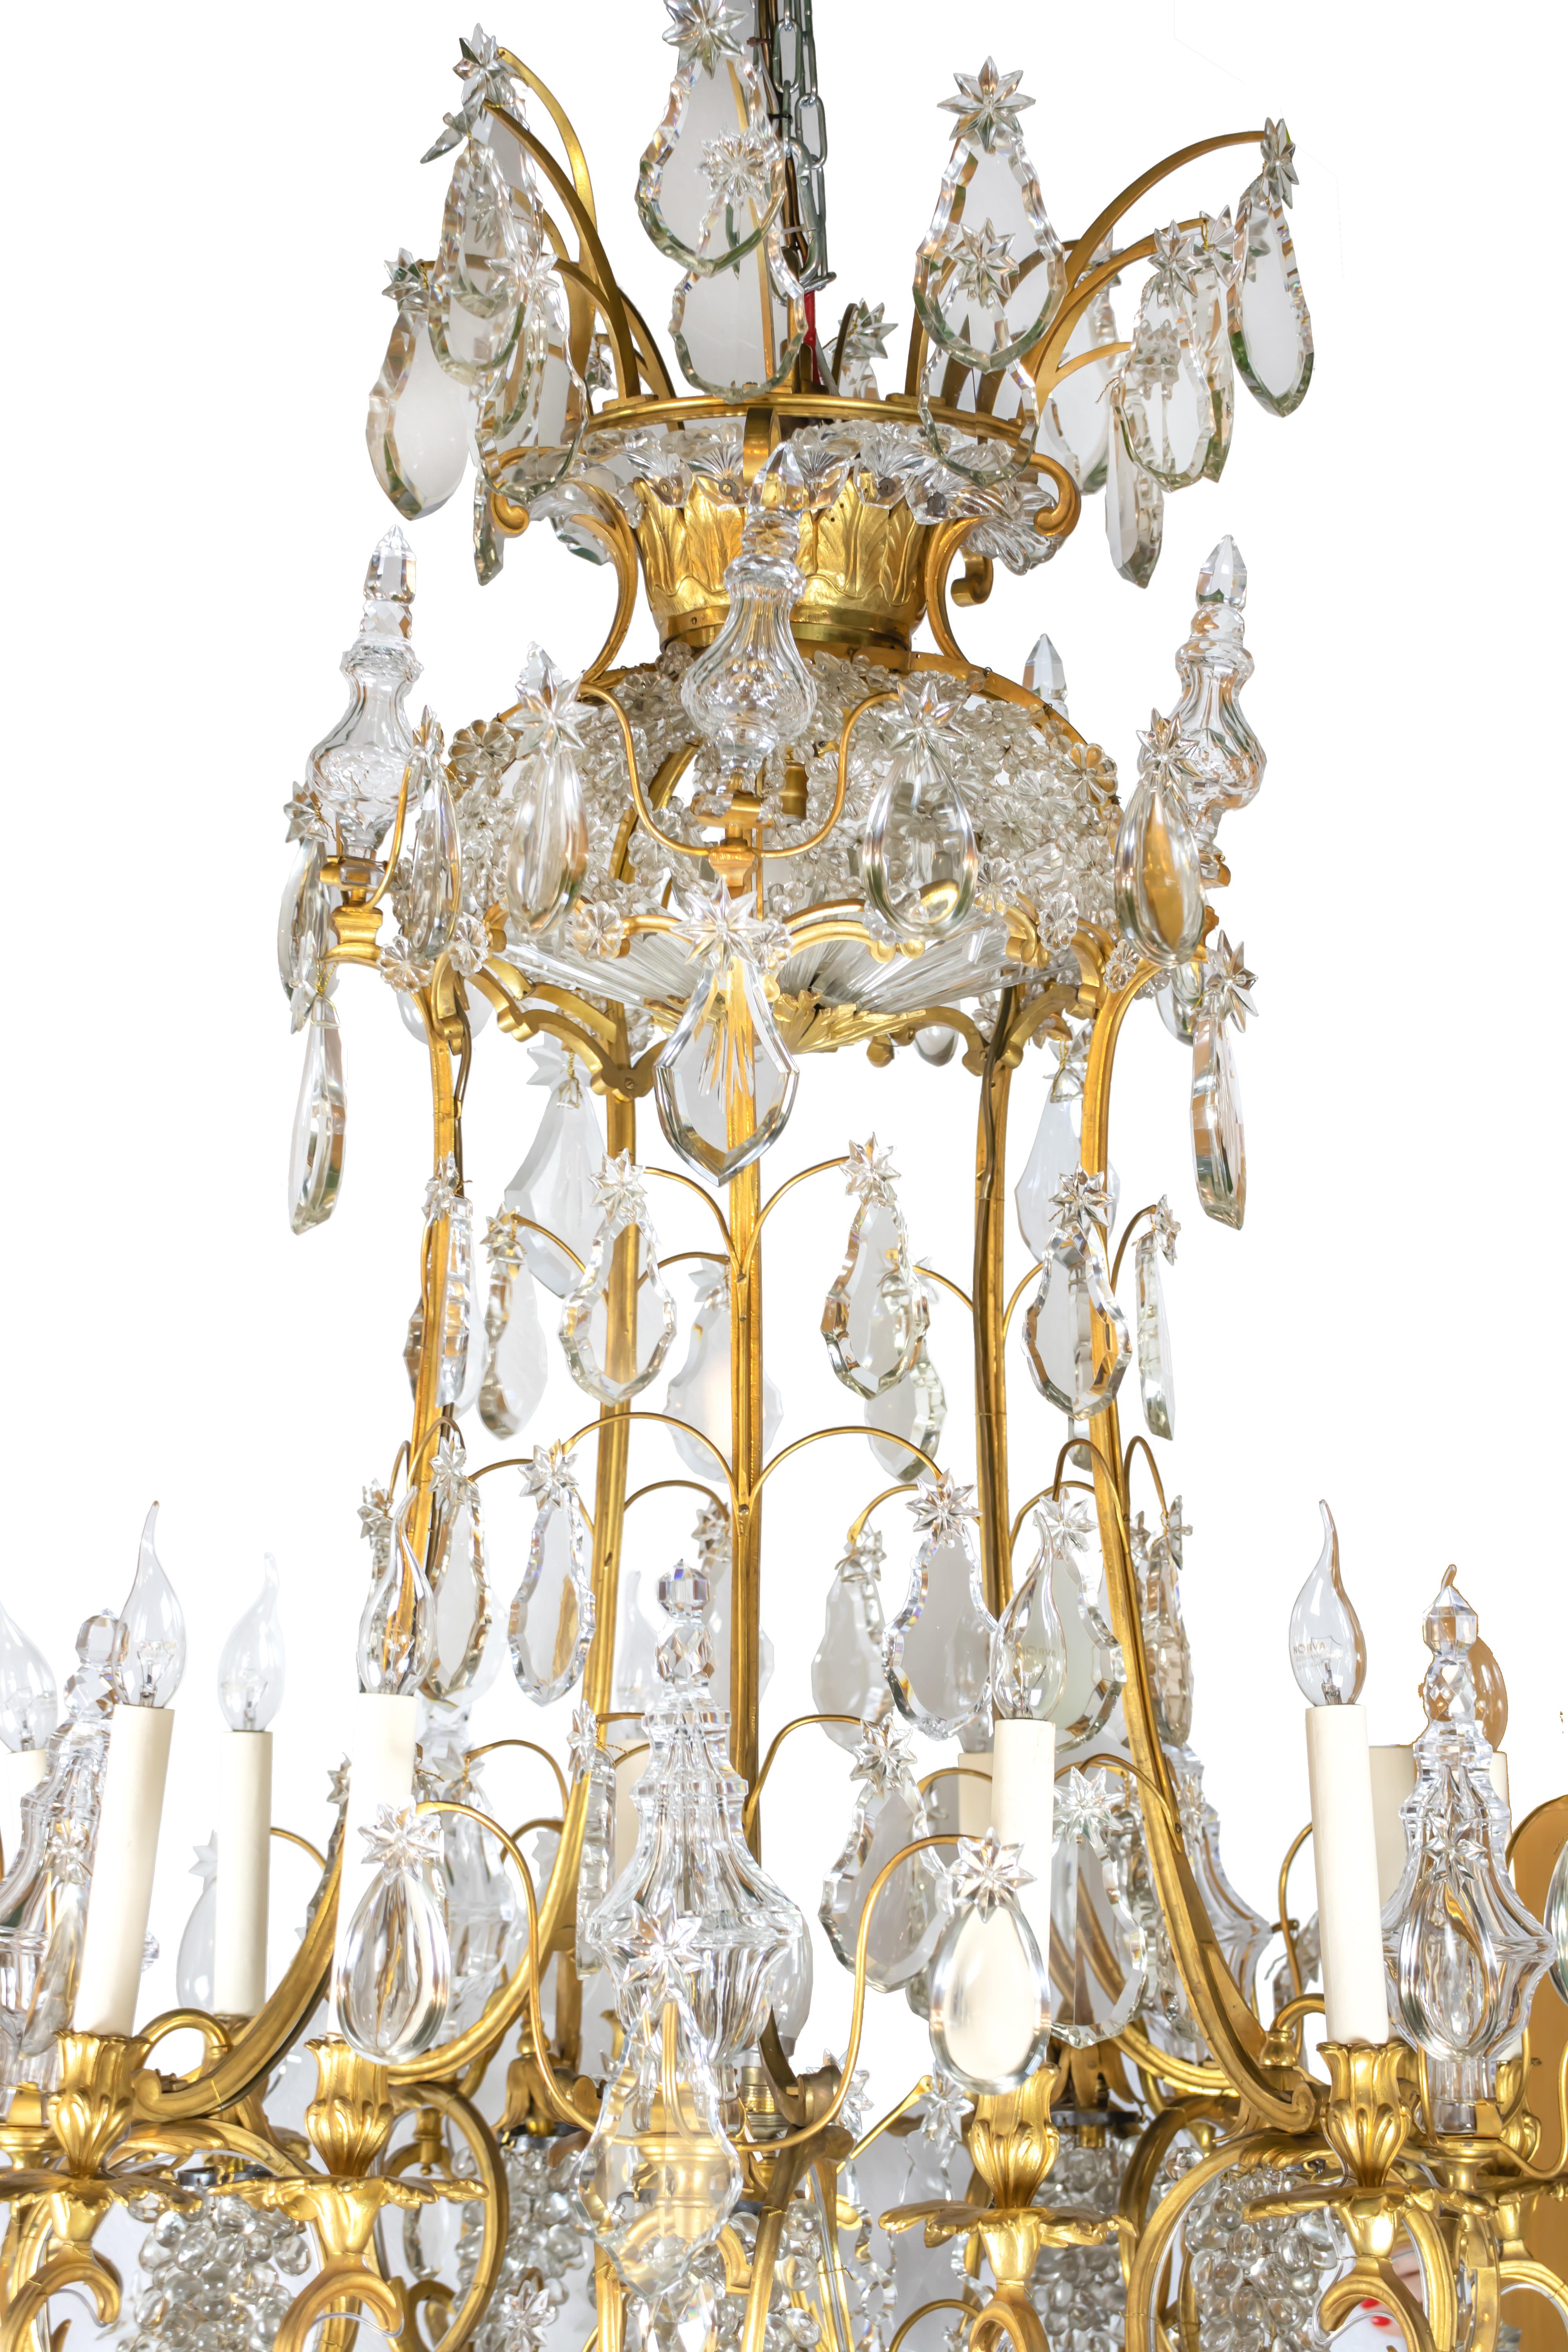 19th Century French Ormolu Ten Lights Chandelier with Cut Crystal Ornaments For Sale 1